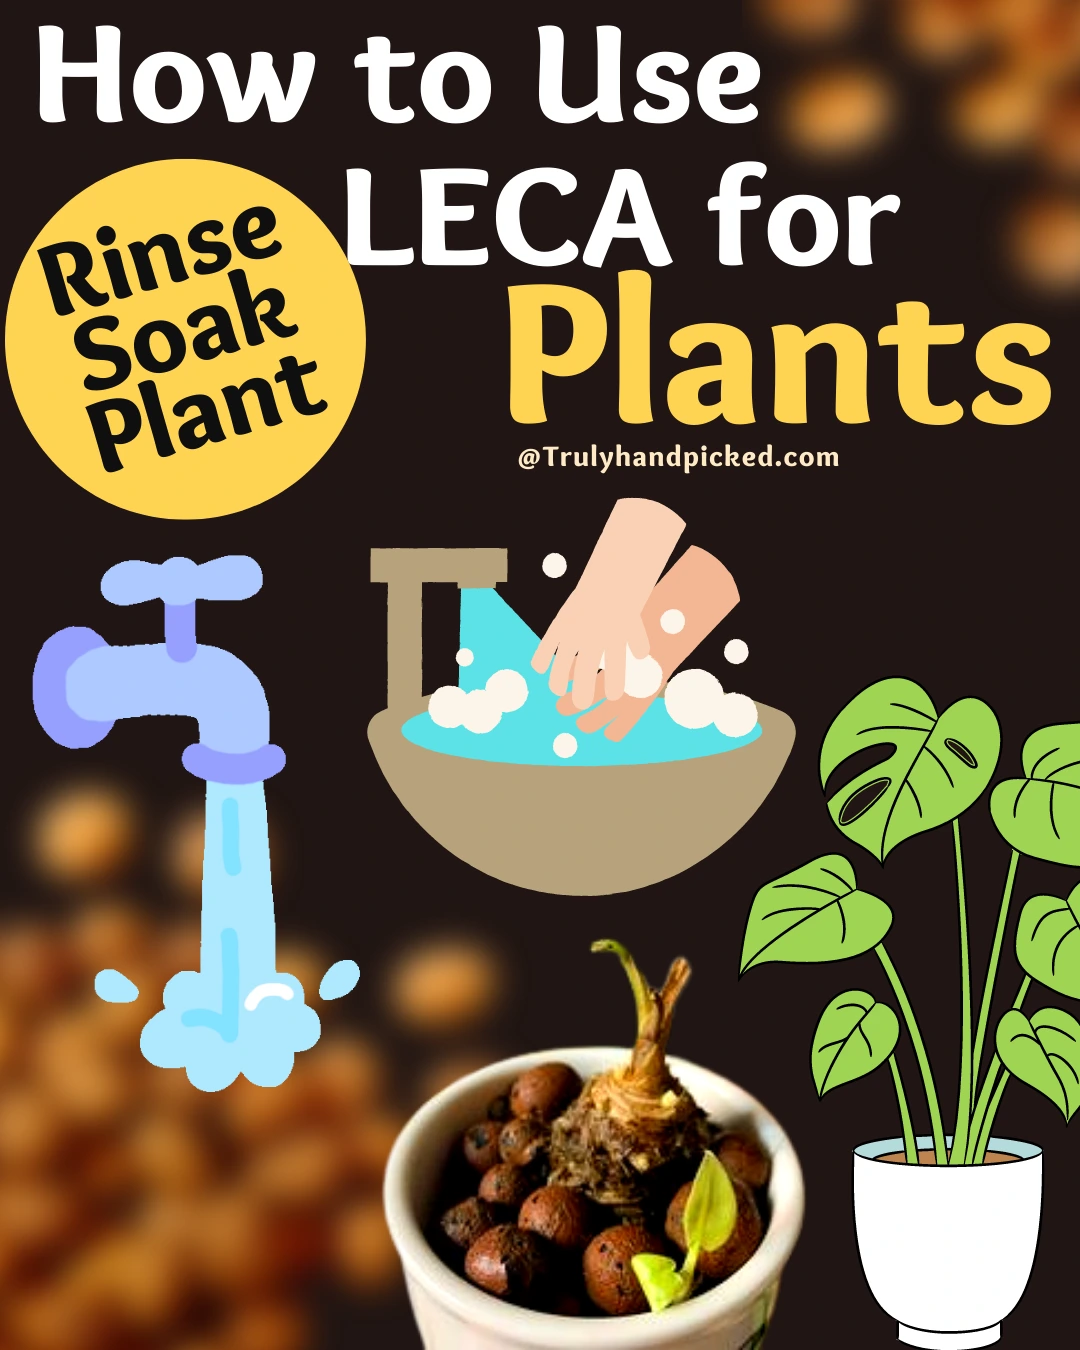 How to use LECA why rinse soak and plant in leca clay balls